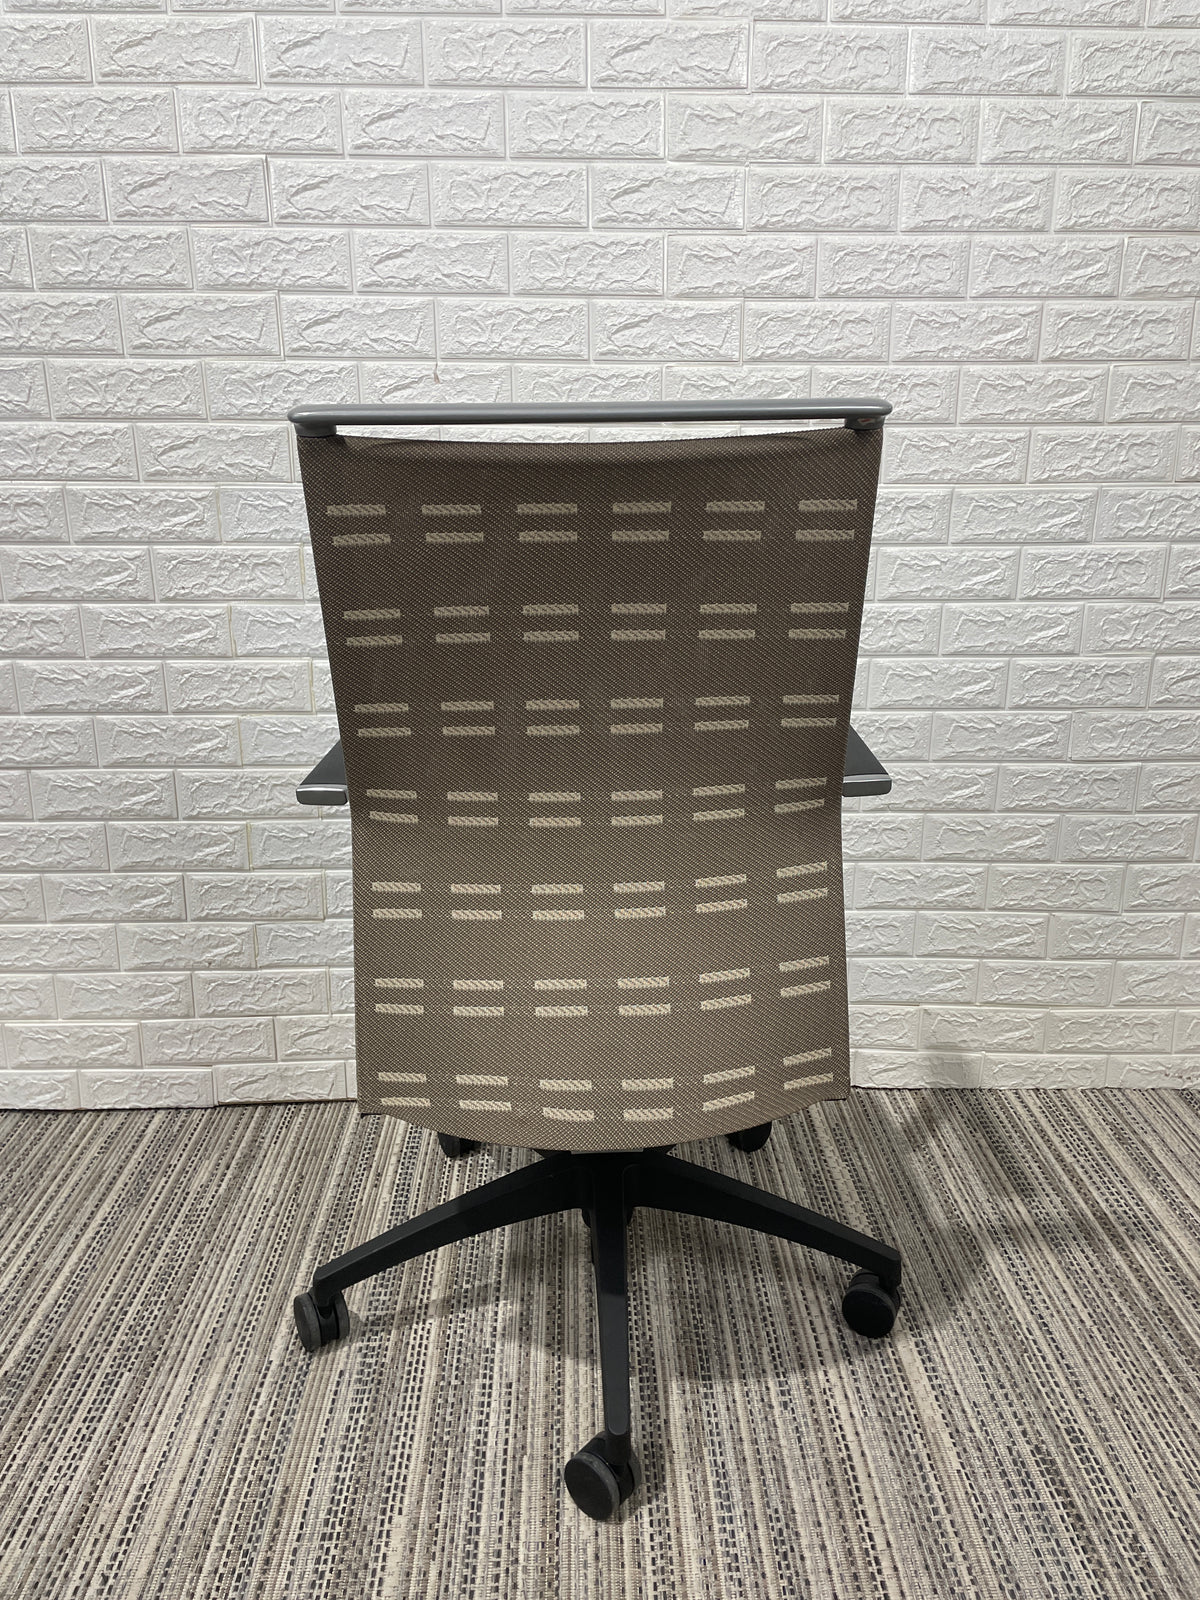 Pre-Owned Sit On It Conference Chair - Duckys Office Furniture